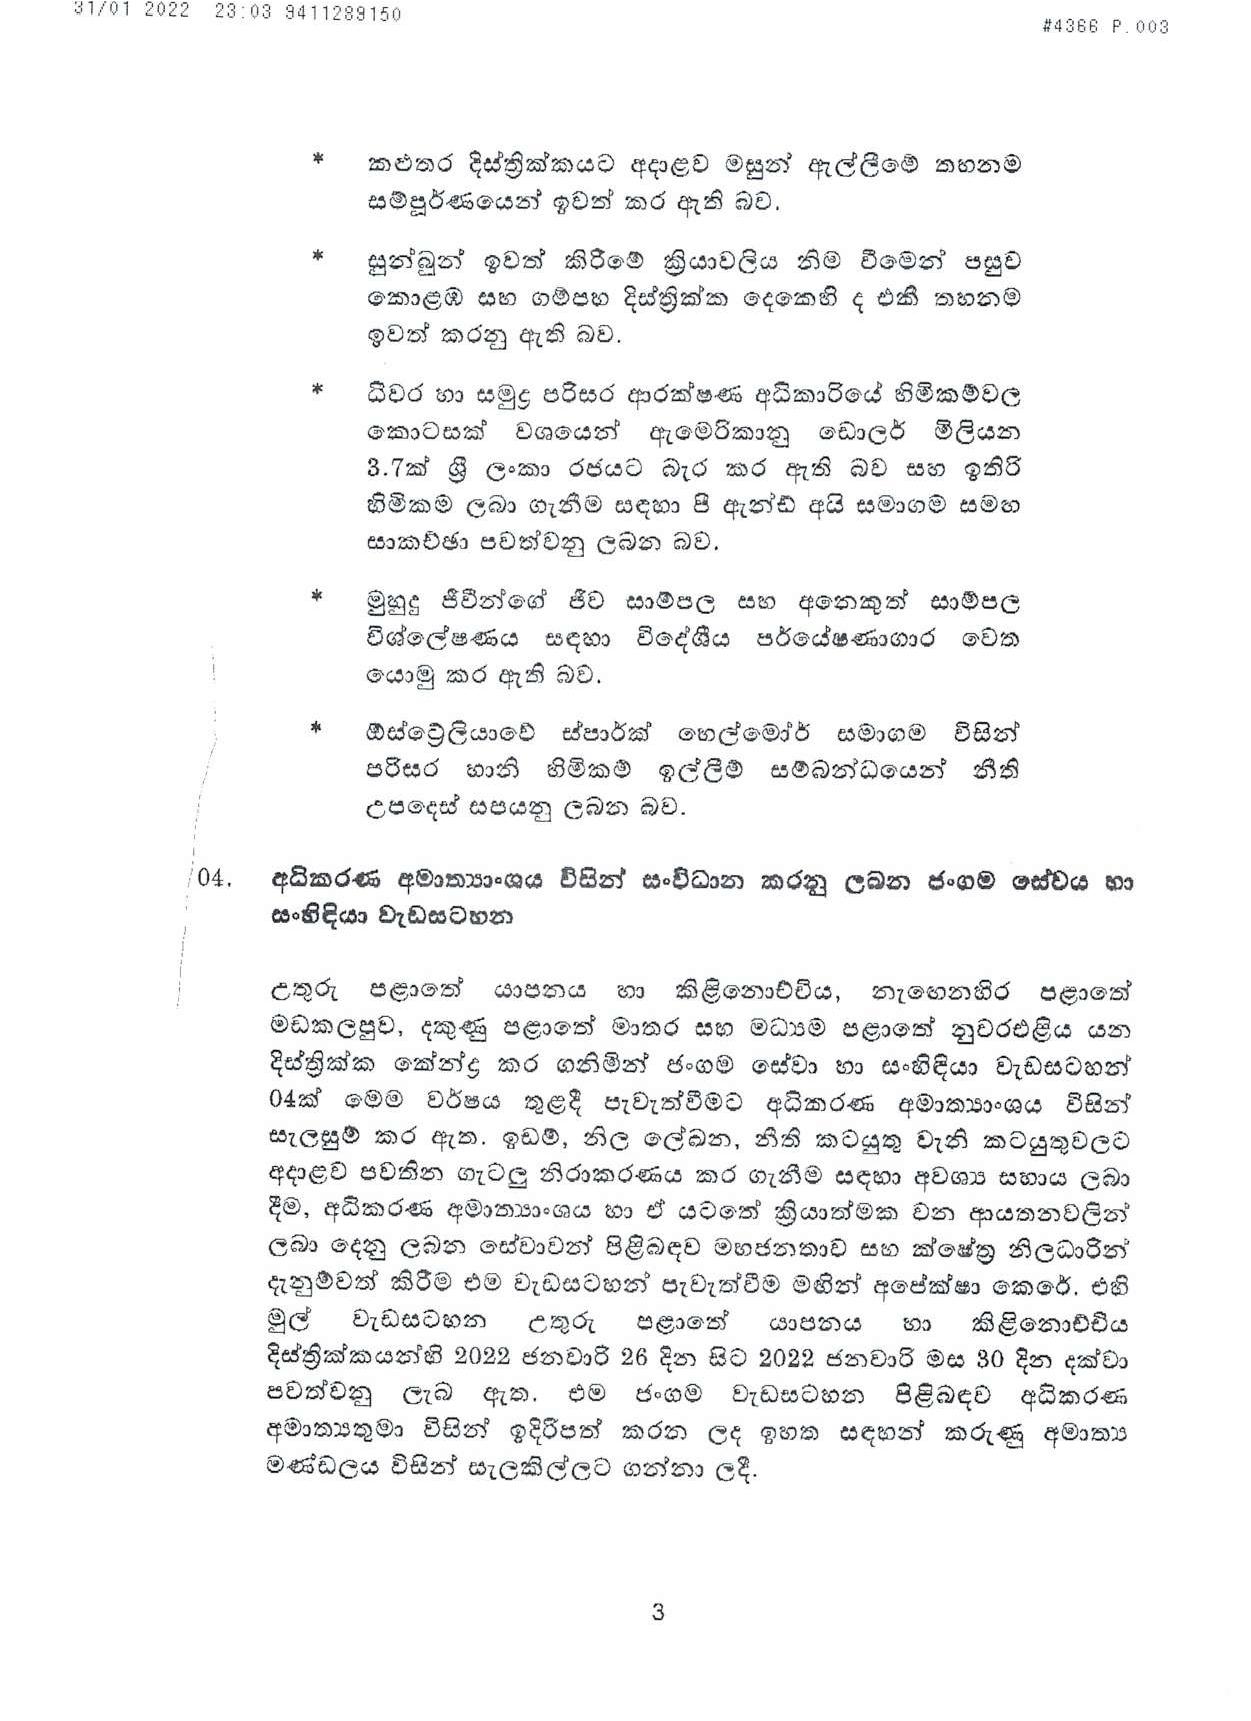 Cabinet Decision on 31.01.2022 page 001